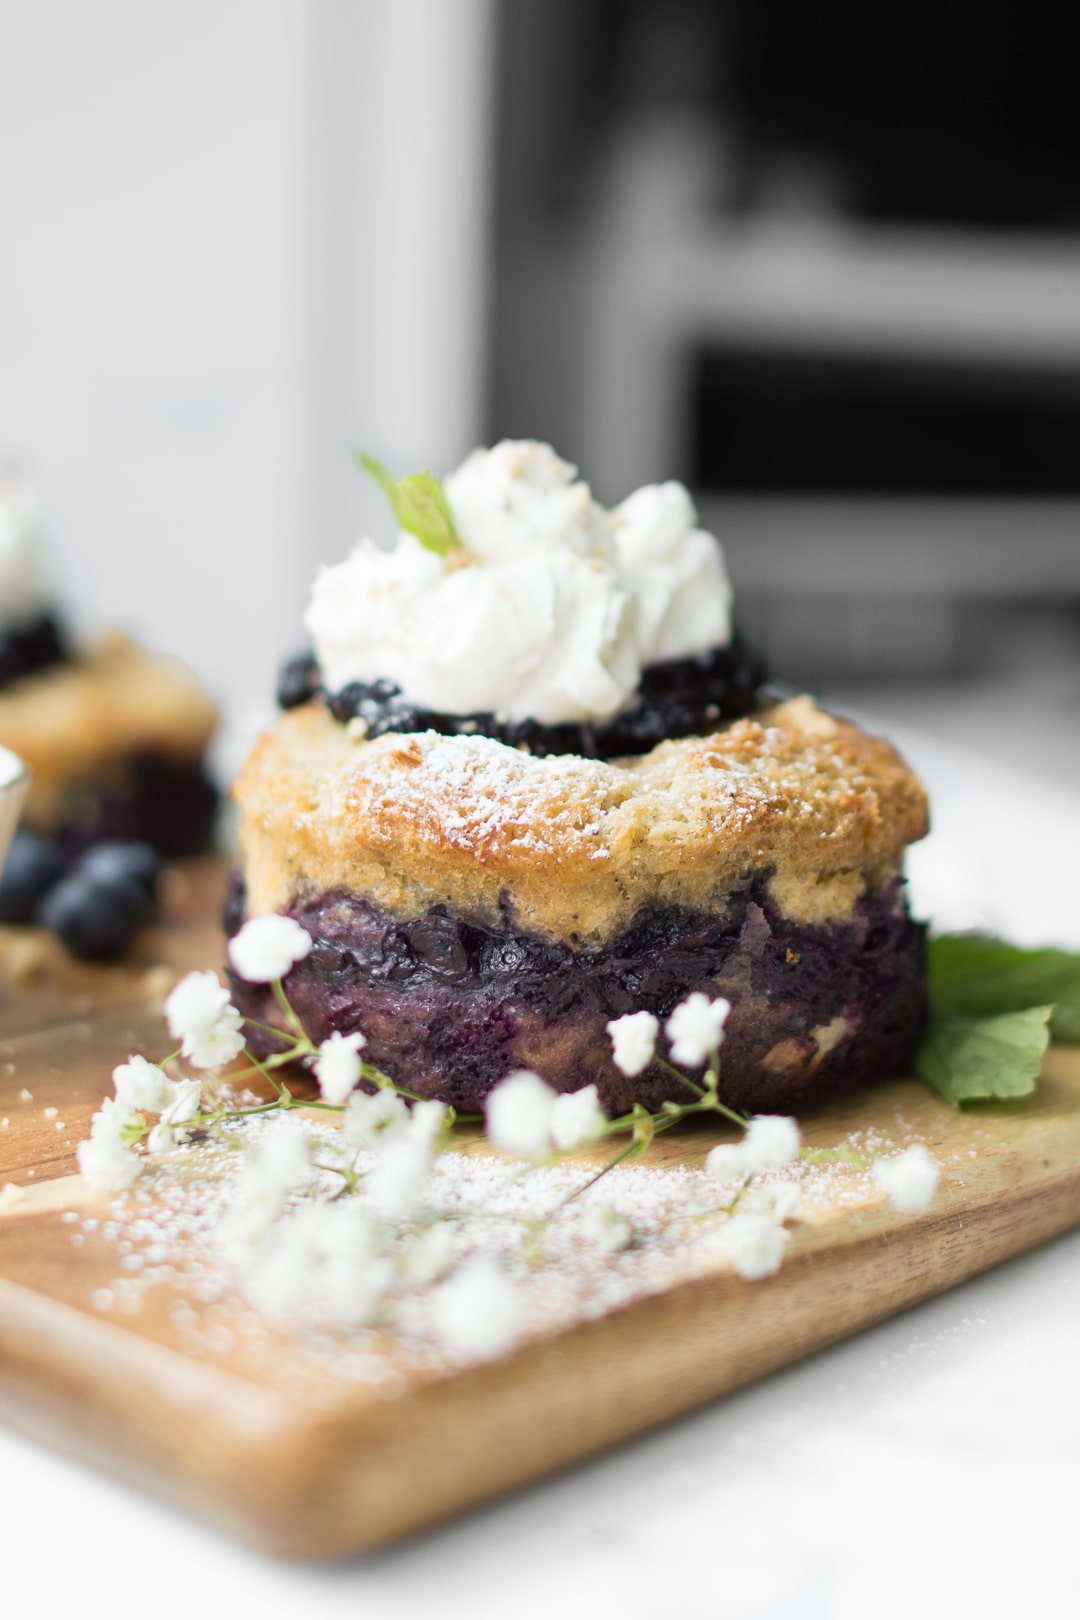 Blueberry French Toast Cake on a wooden board with baby's breath